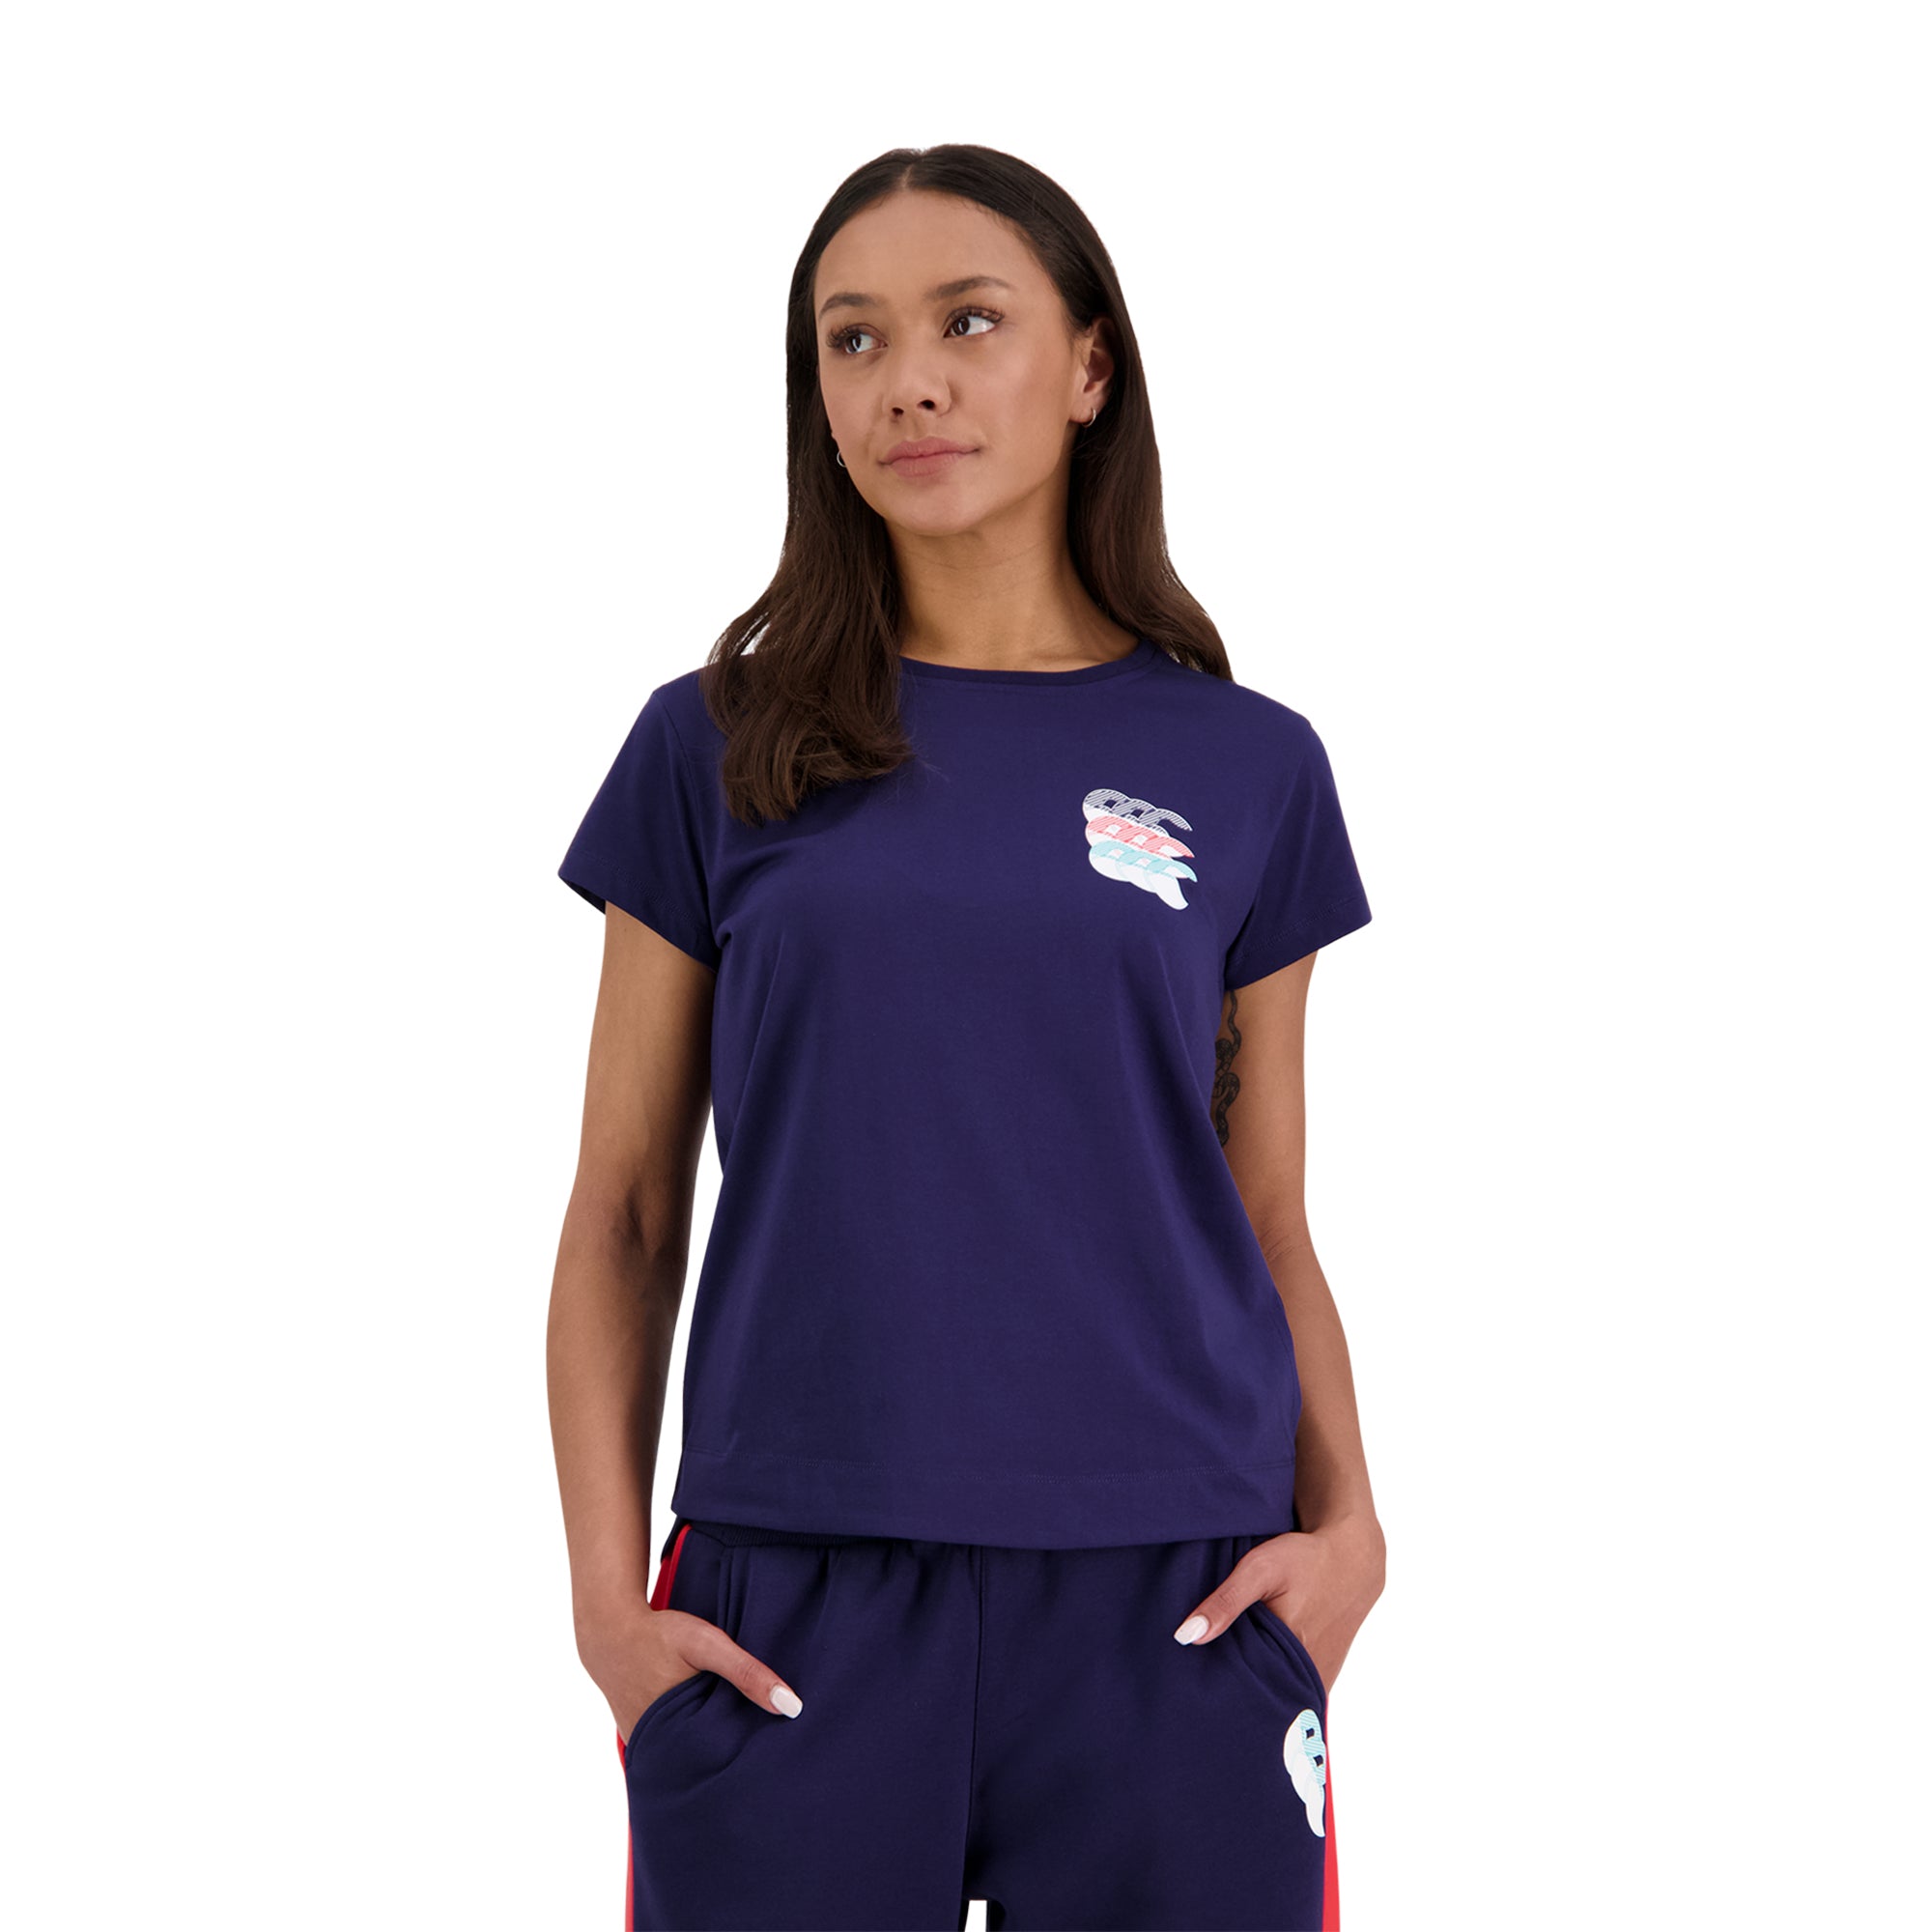 The Clash Womens Tee S1 23 - The Rugby Shop Darwin